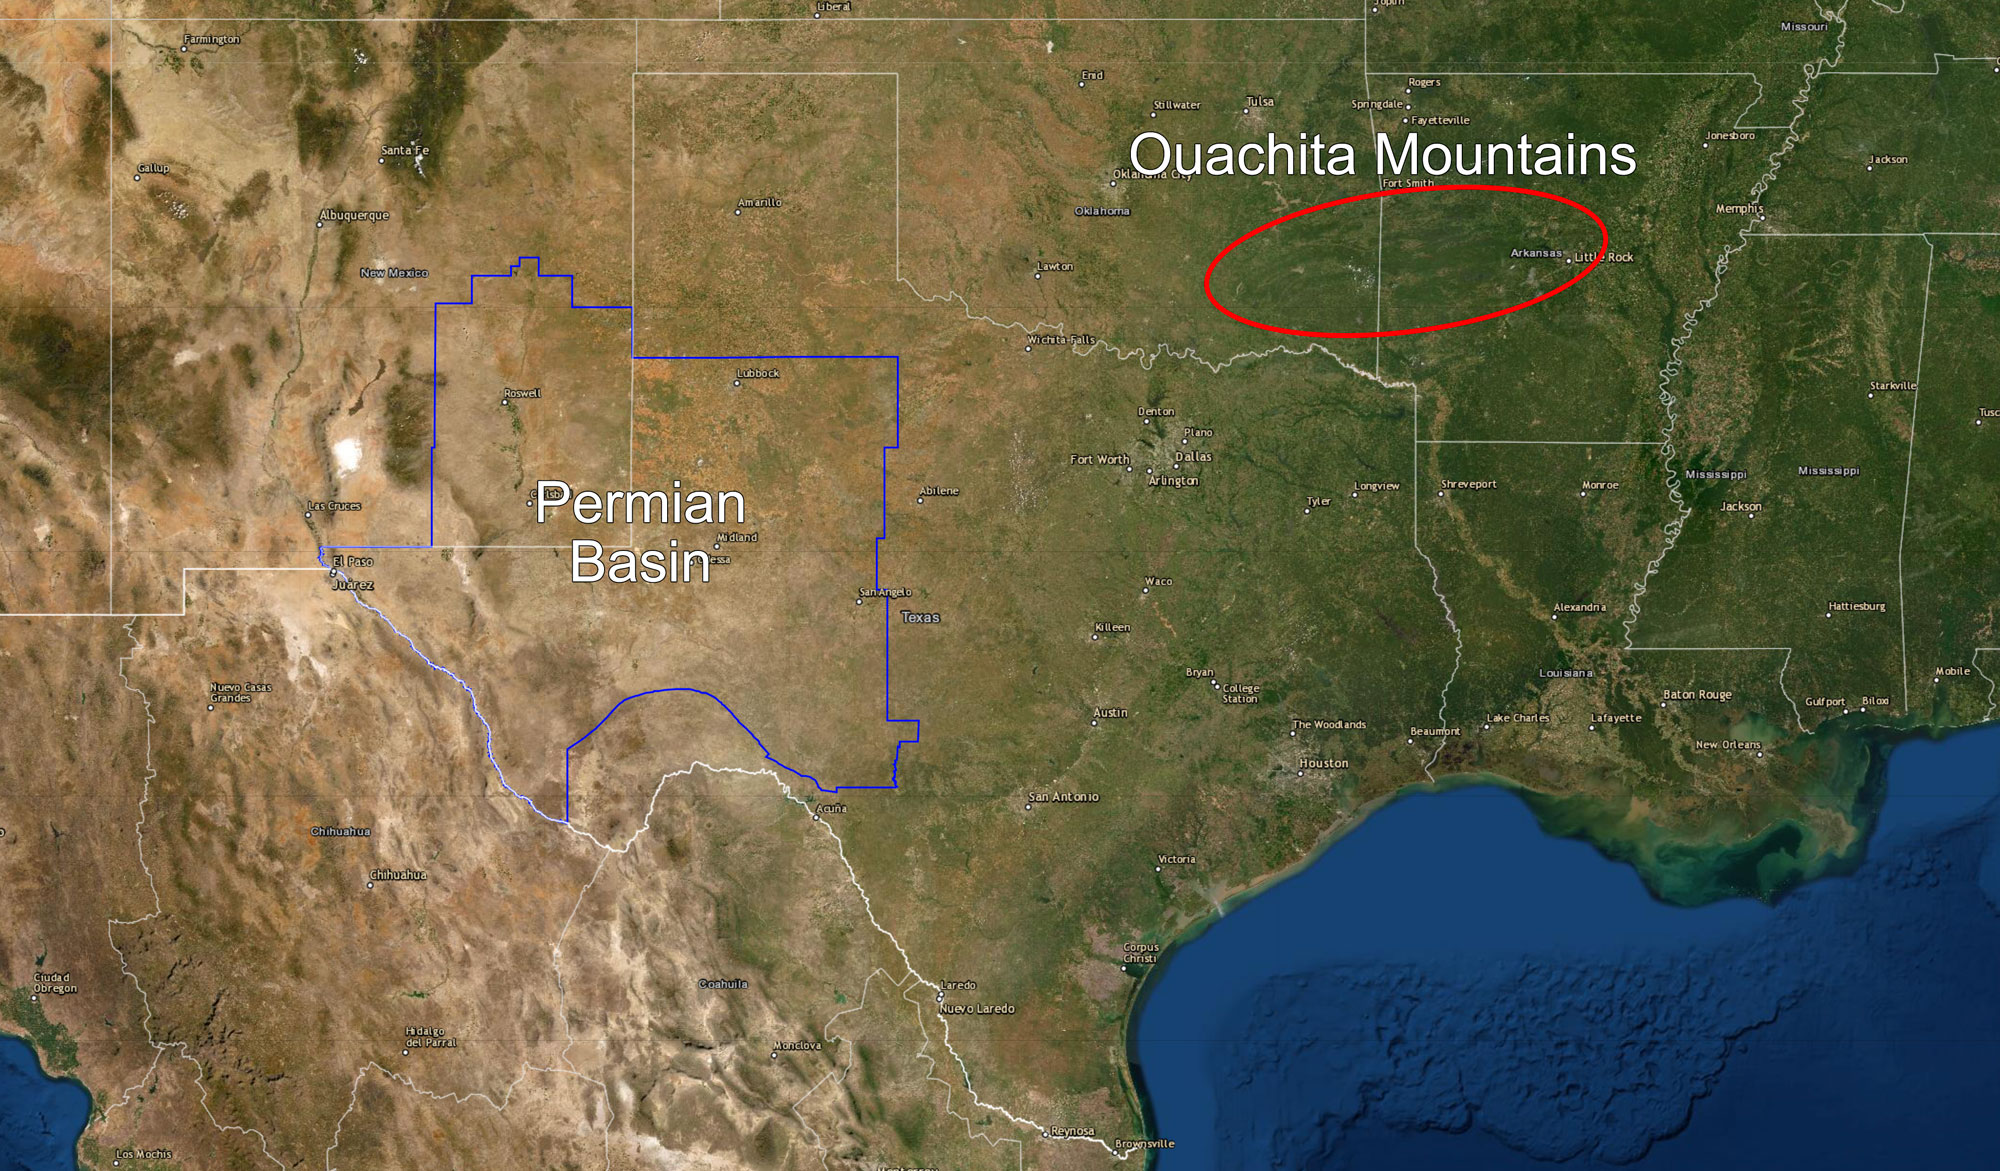 Image showing Texas, New Mexico, Oklahoma, Arkansas, and Louisiana made from satellite photos. The boundaries of the Permian Basin in western Texas and southeastern New Mexico outlined in blue. The location of the Ouachita Mountains in southeastern Oklahoma to west-central Arkansas is circled in red.